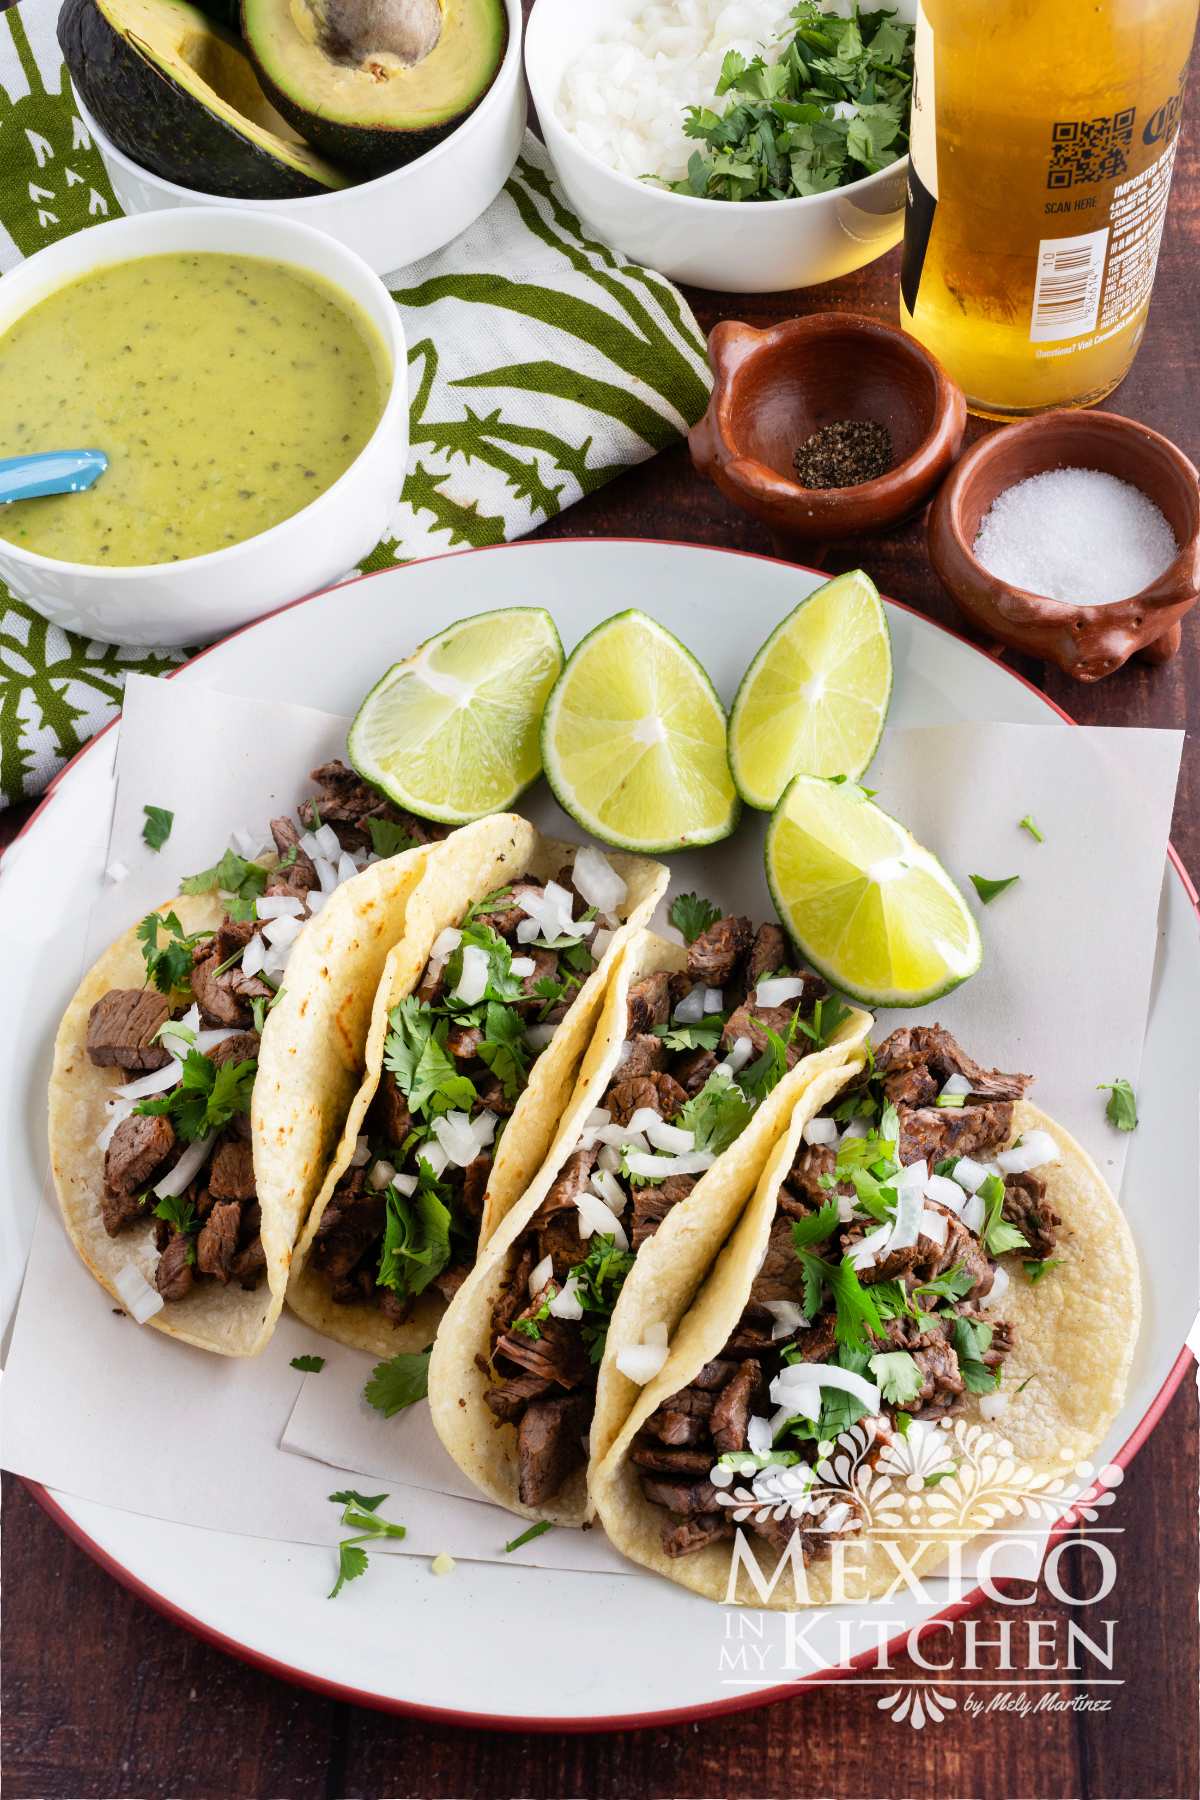 Steak Tacos served in corn tortillas and topped with cilantro and chopped onions.